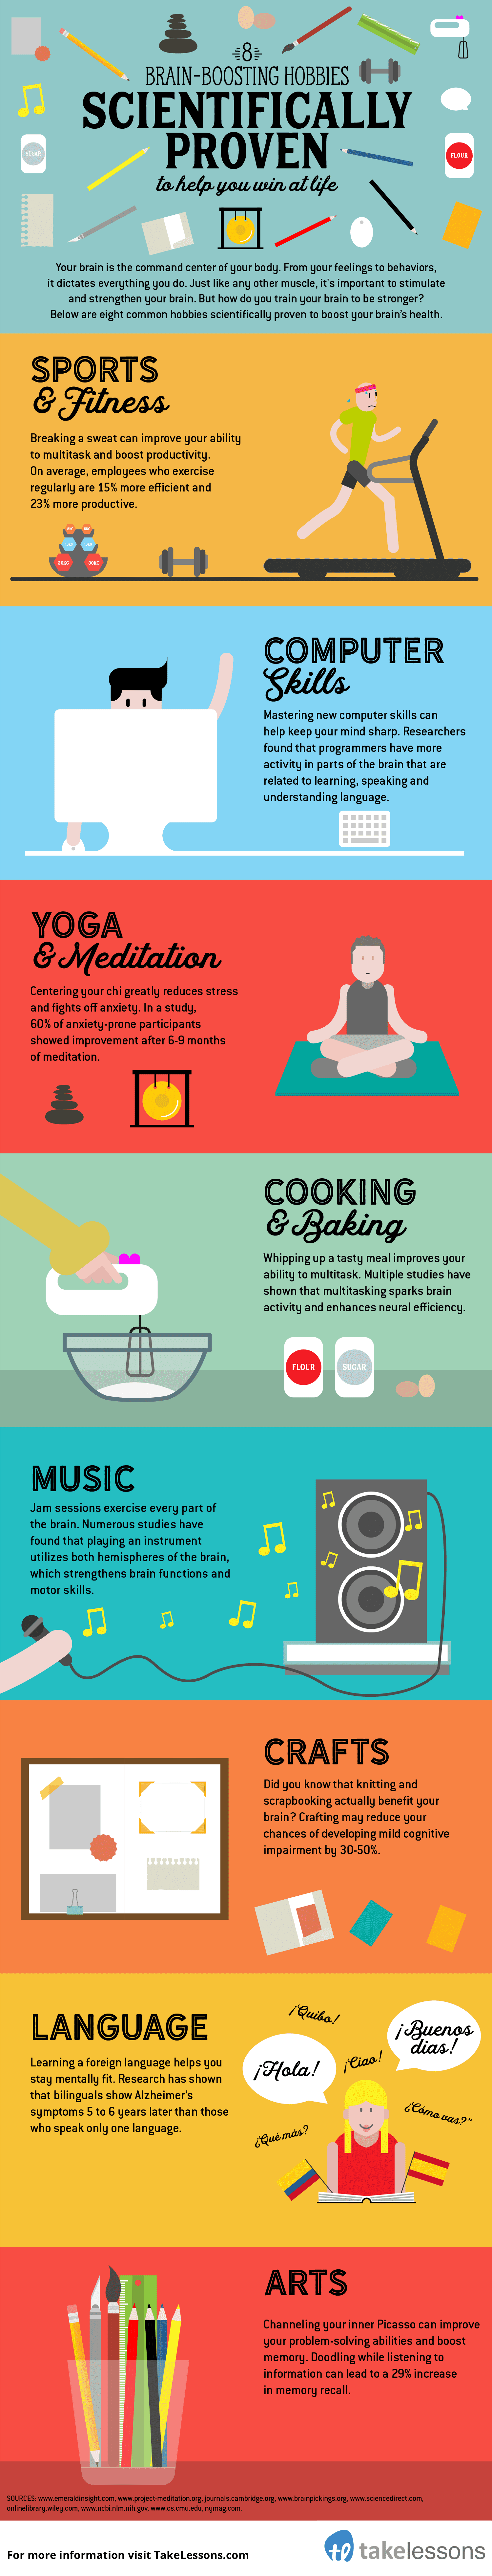 8 best hobbies for your brain - infographic